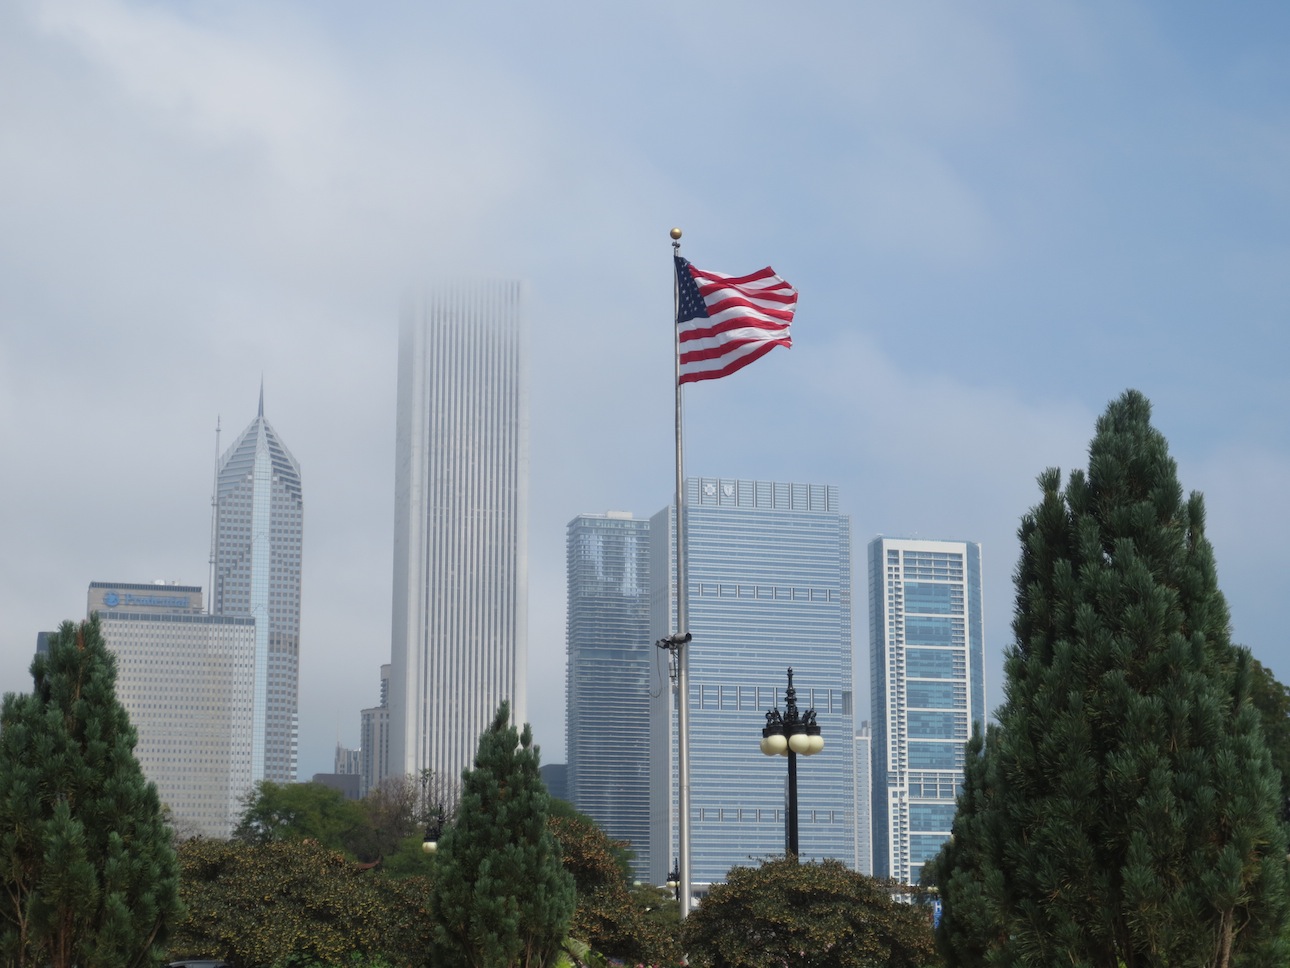 American flag in front of Chicago buildings.